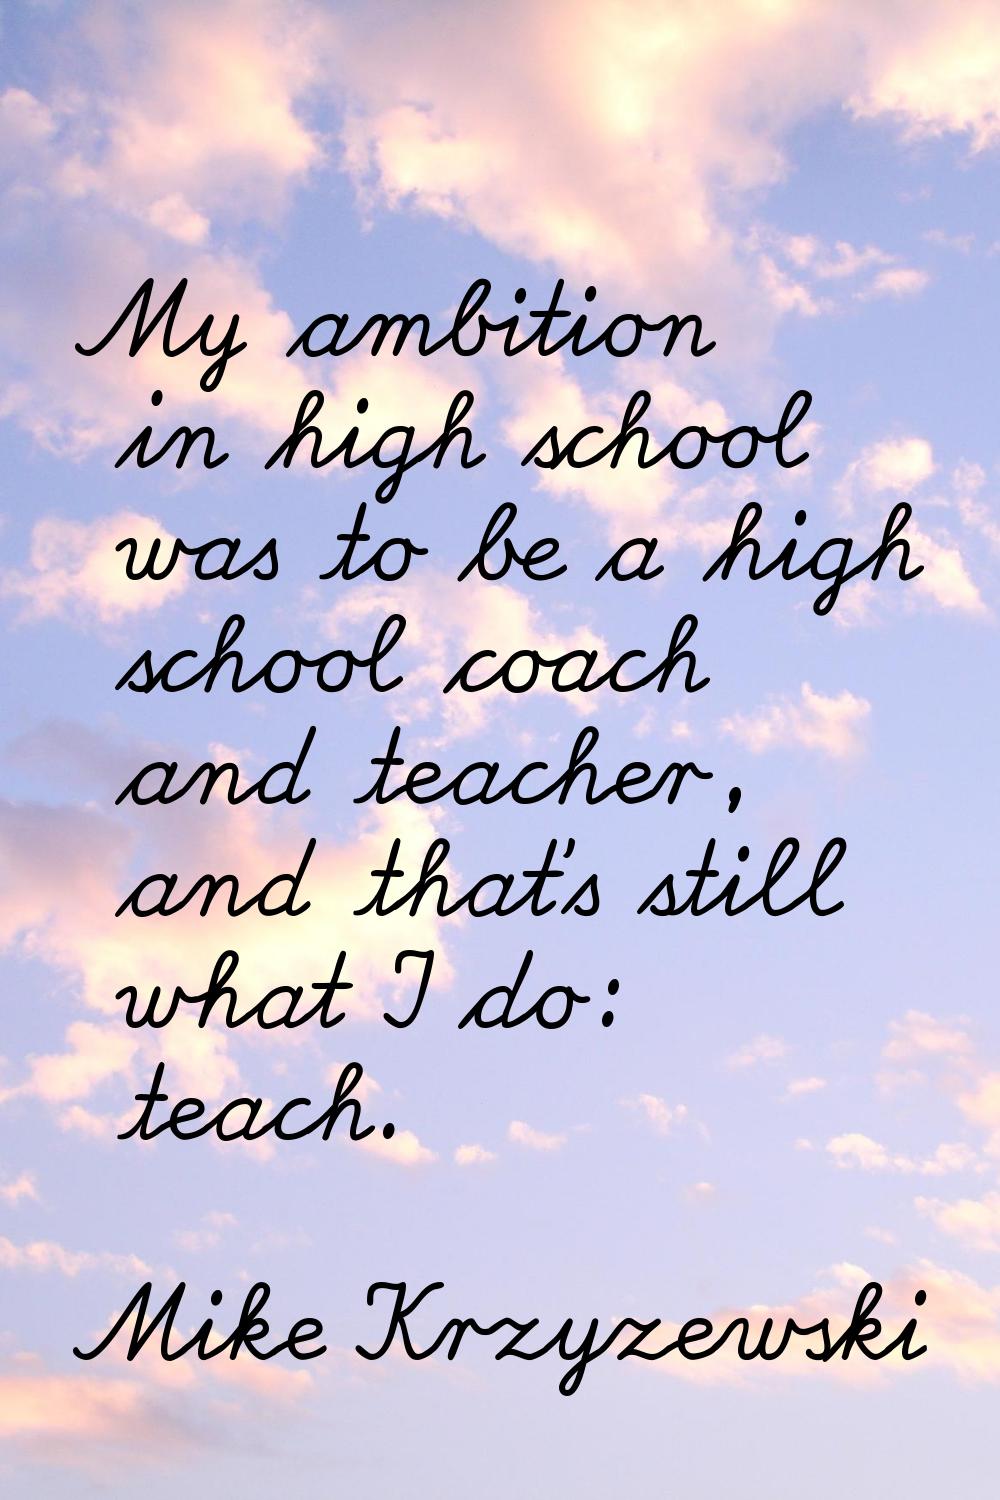 My ambition in high school was to be a high school coach and teacher, and that's still what I do: t